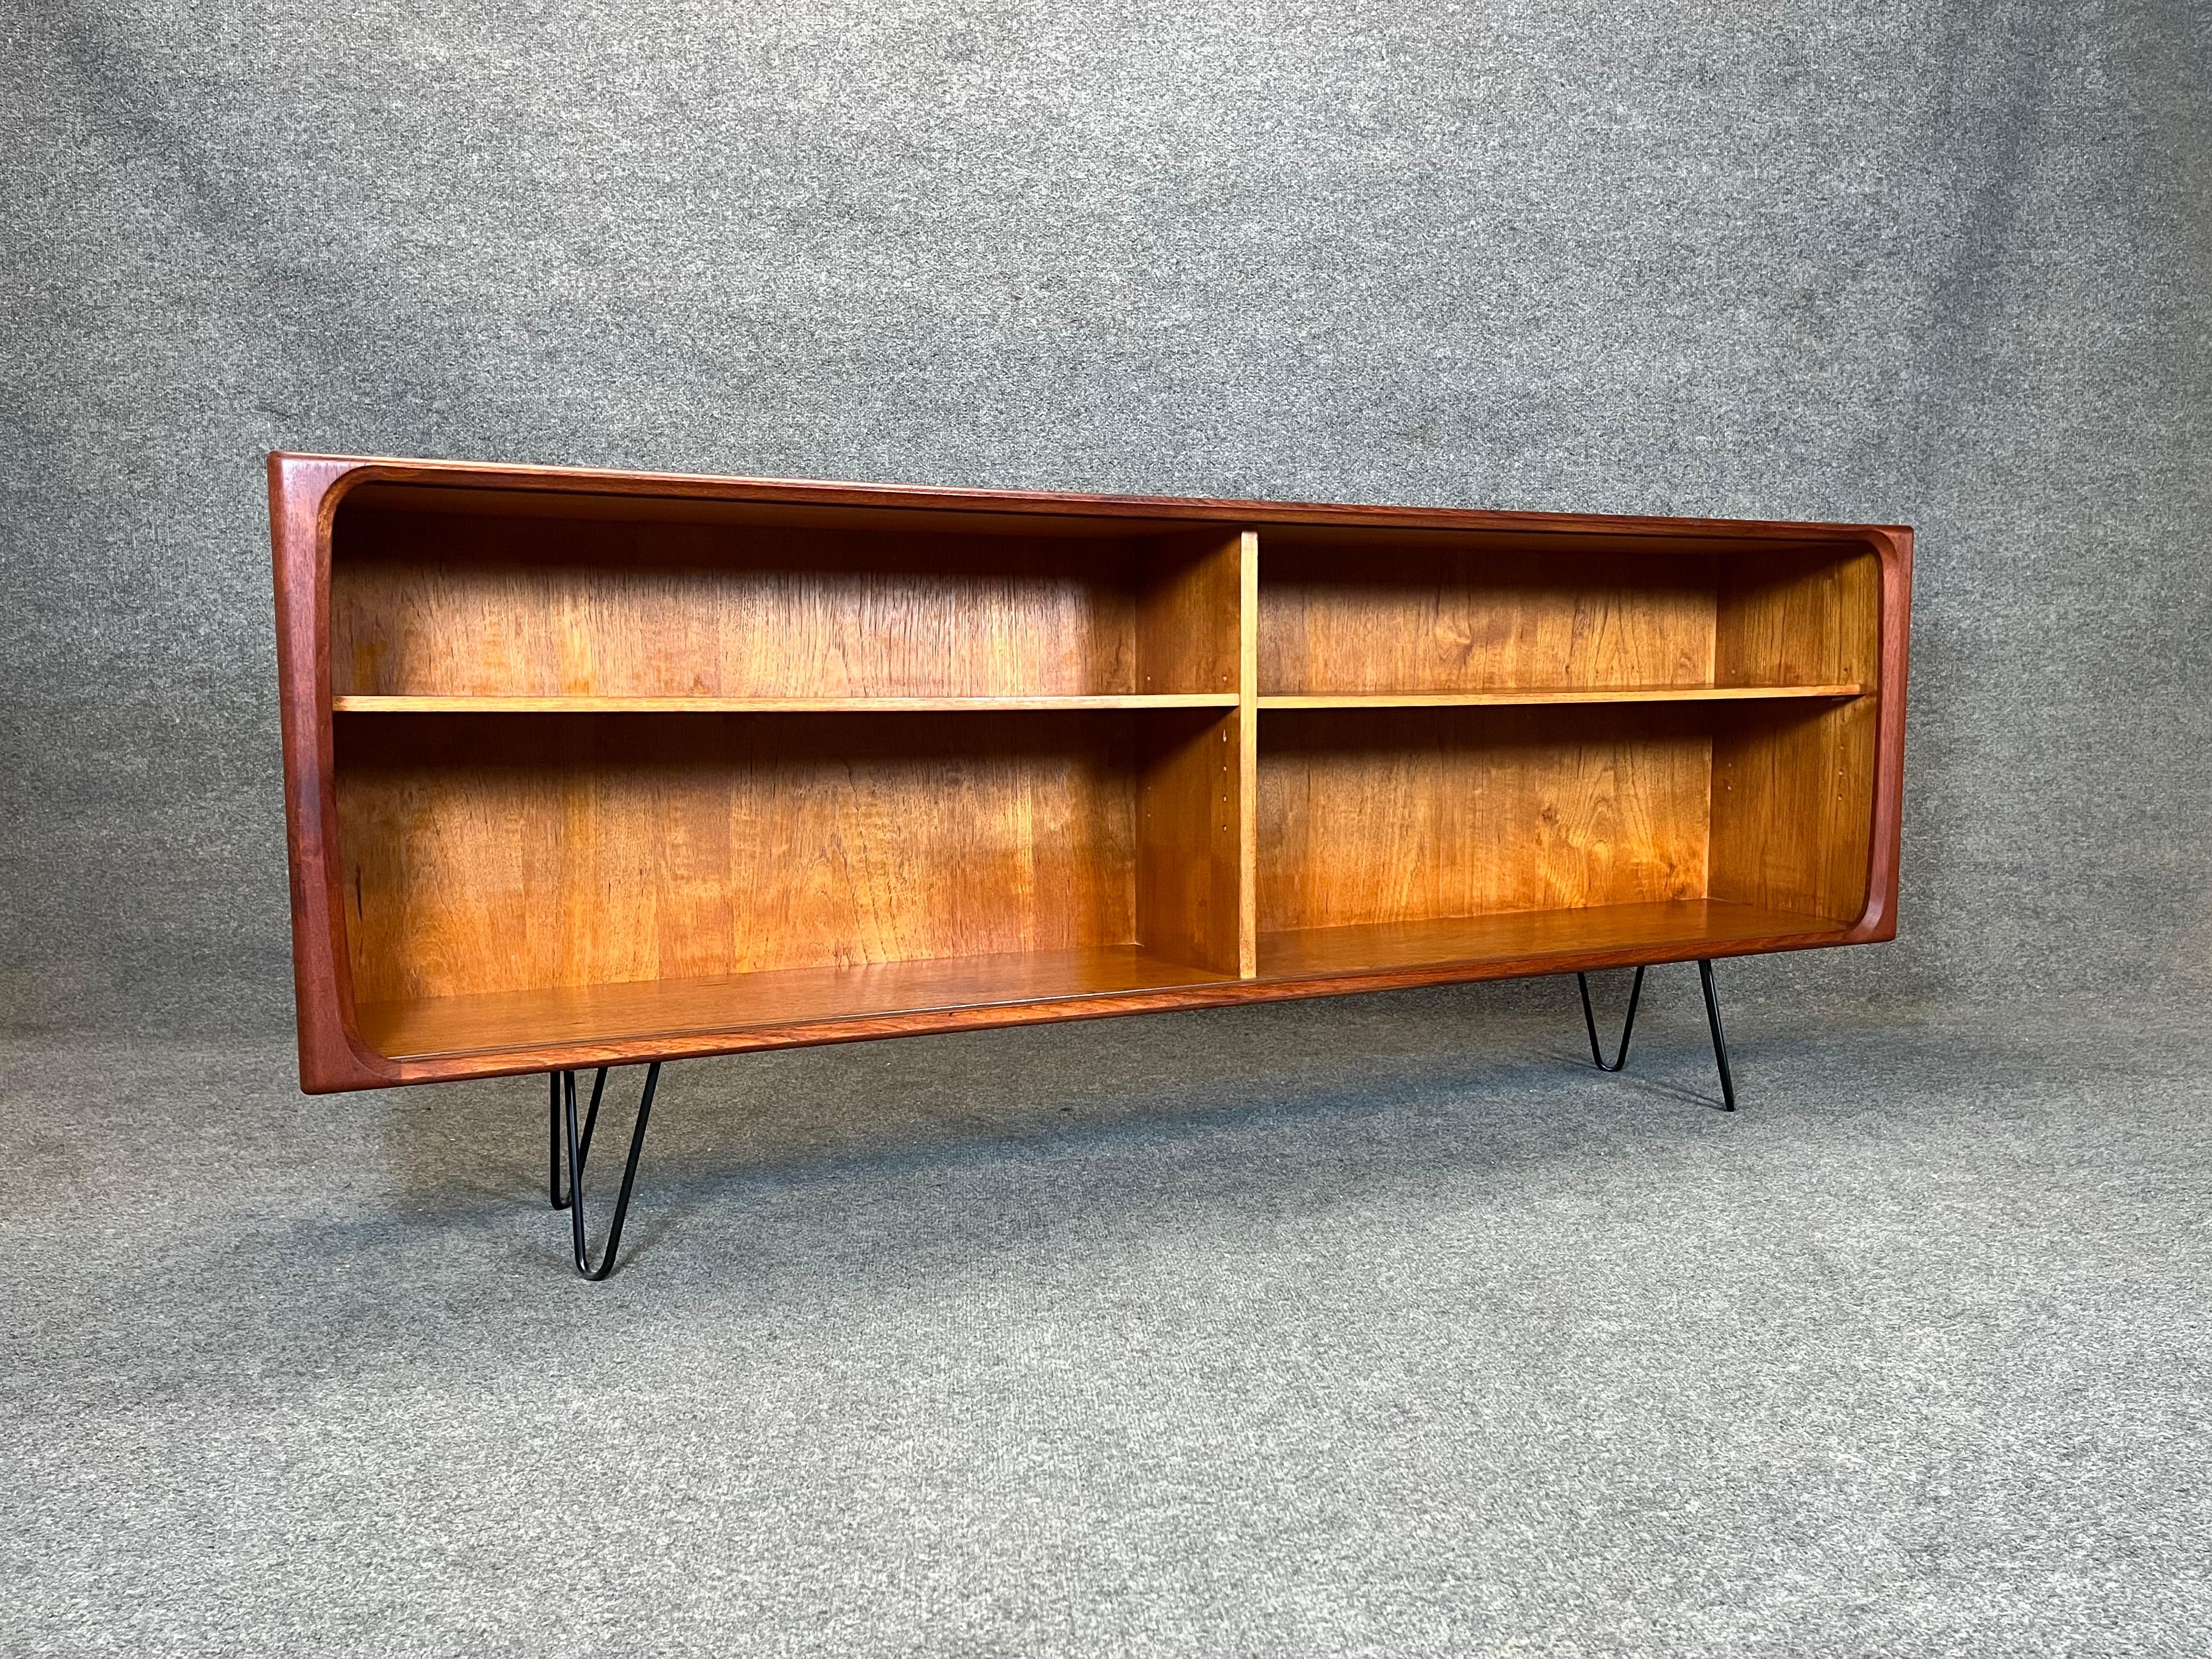 Vintage Danish Modern Teak credenza. This piece is very versatile, could be used as a media console, bookcase or an entryway piece. 

Has 2 adjustable shelves on each side. Finished teak back.

Piece is in good vintage condition with age appropriate